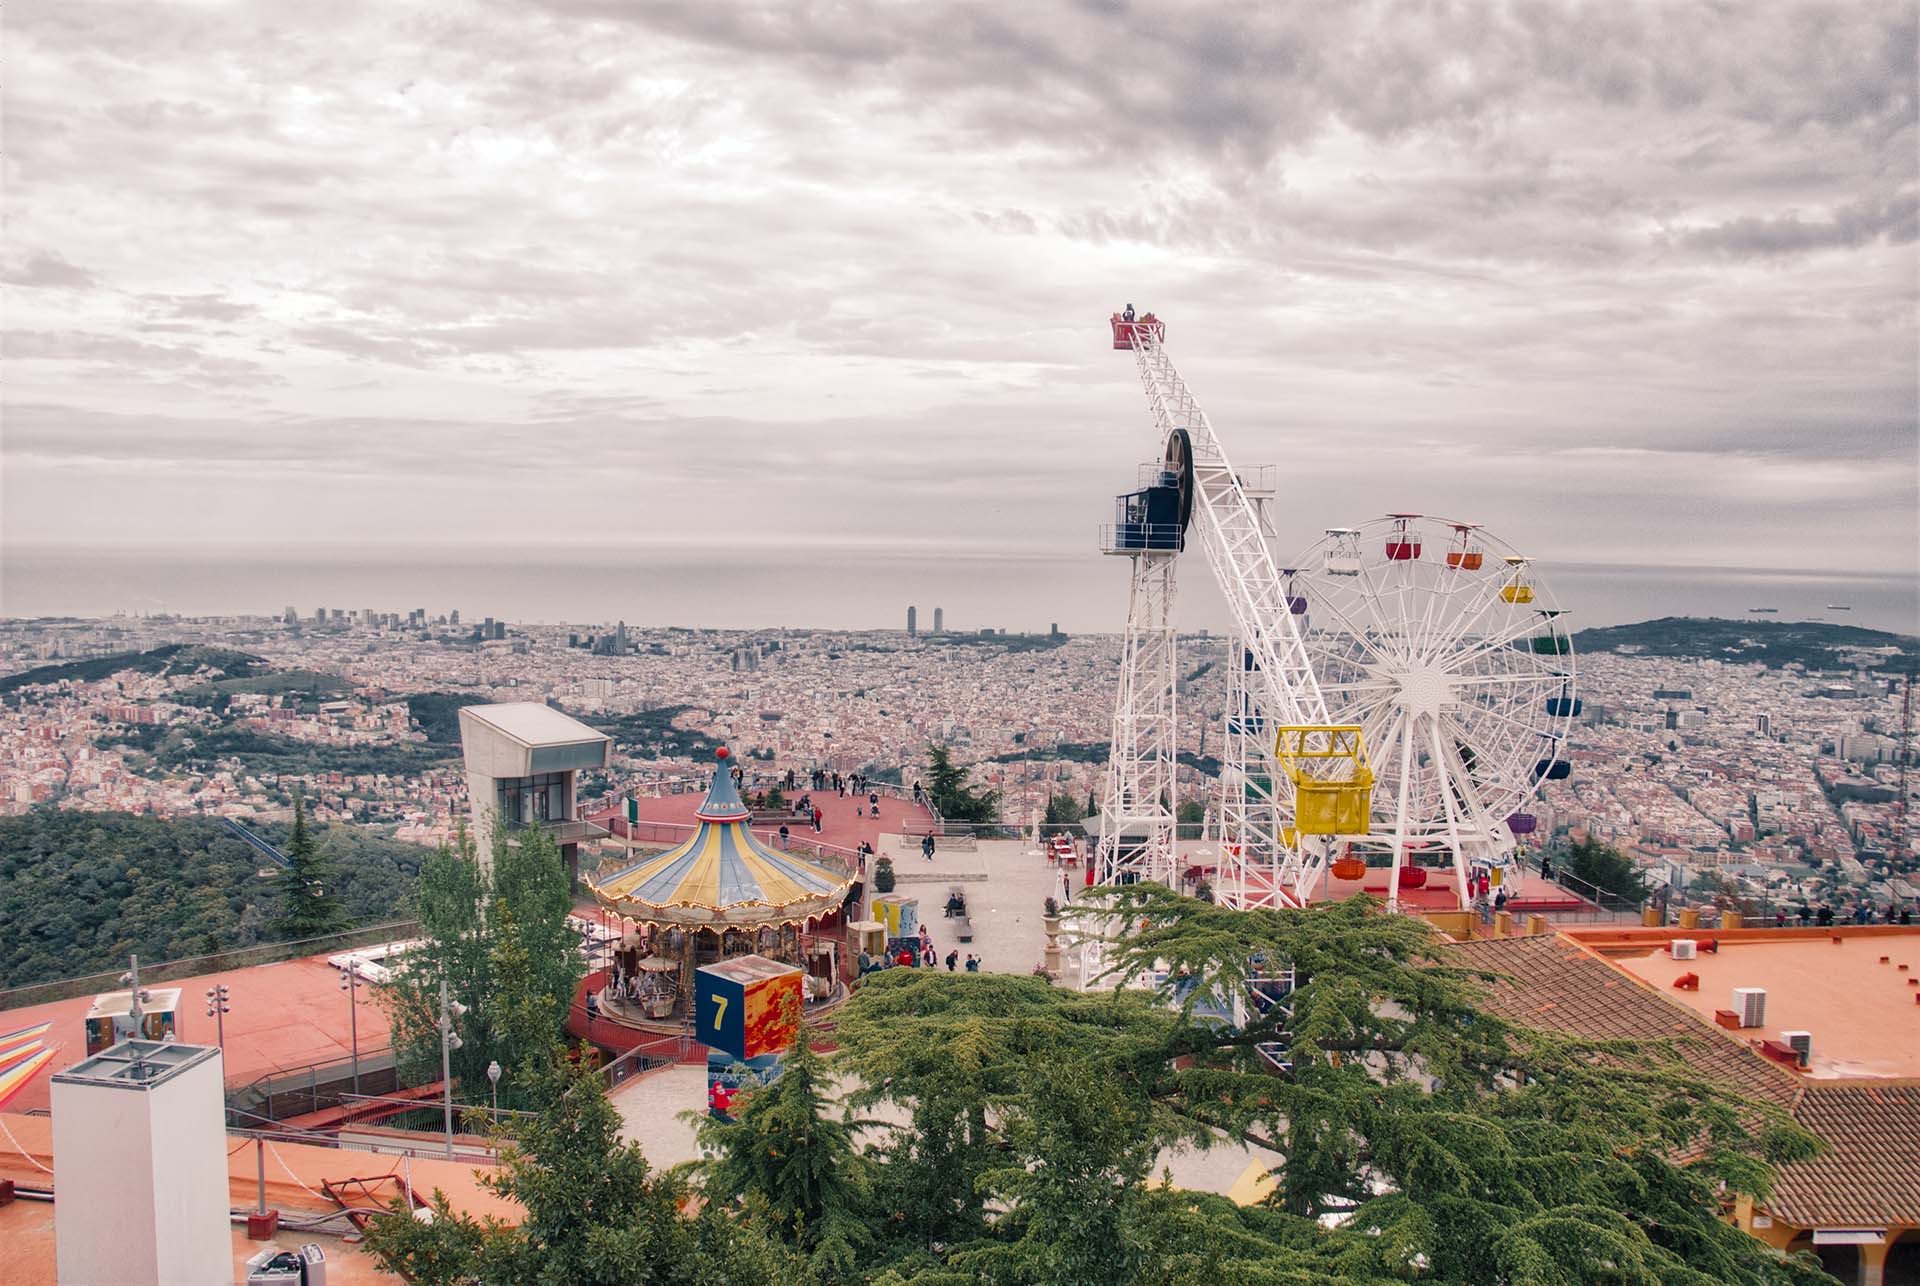 Theme park, things to do in barcelona with kids